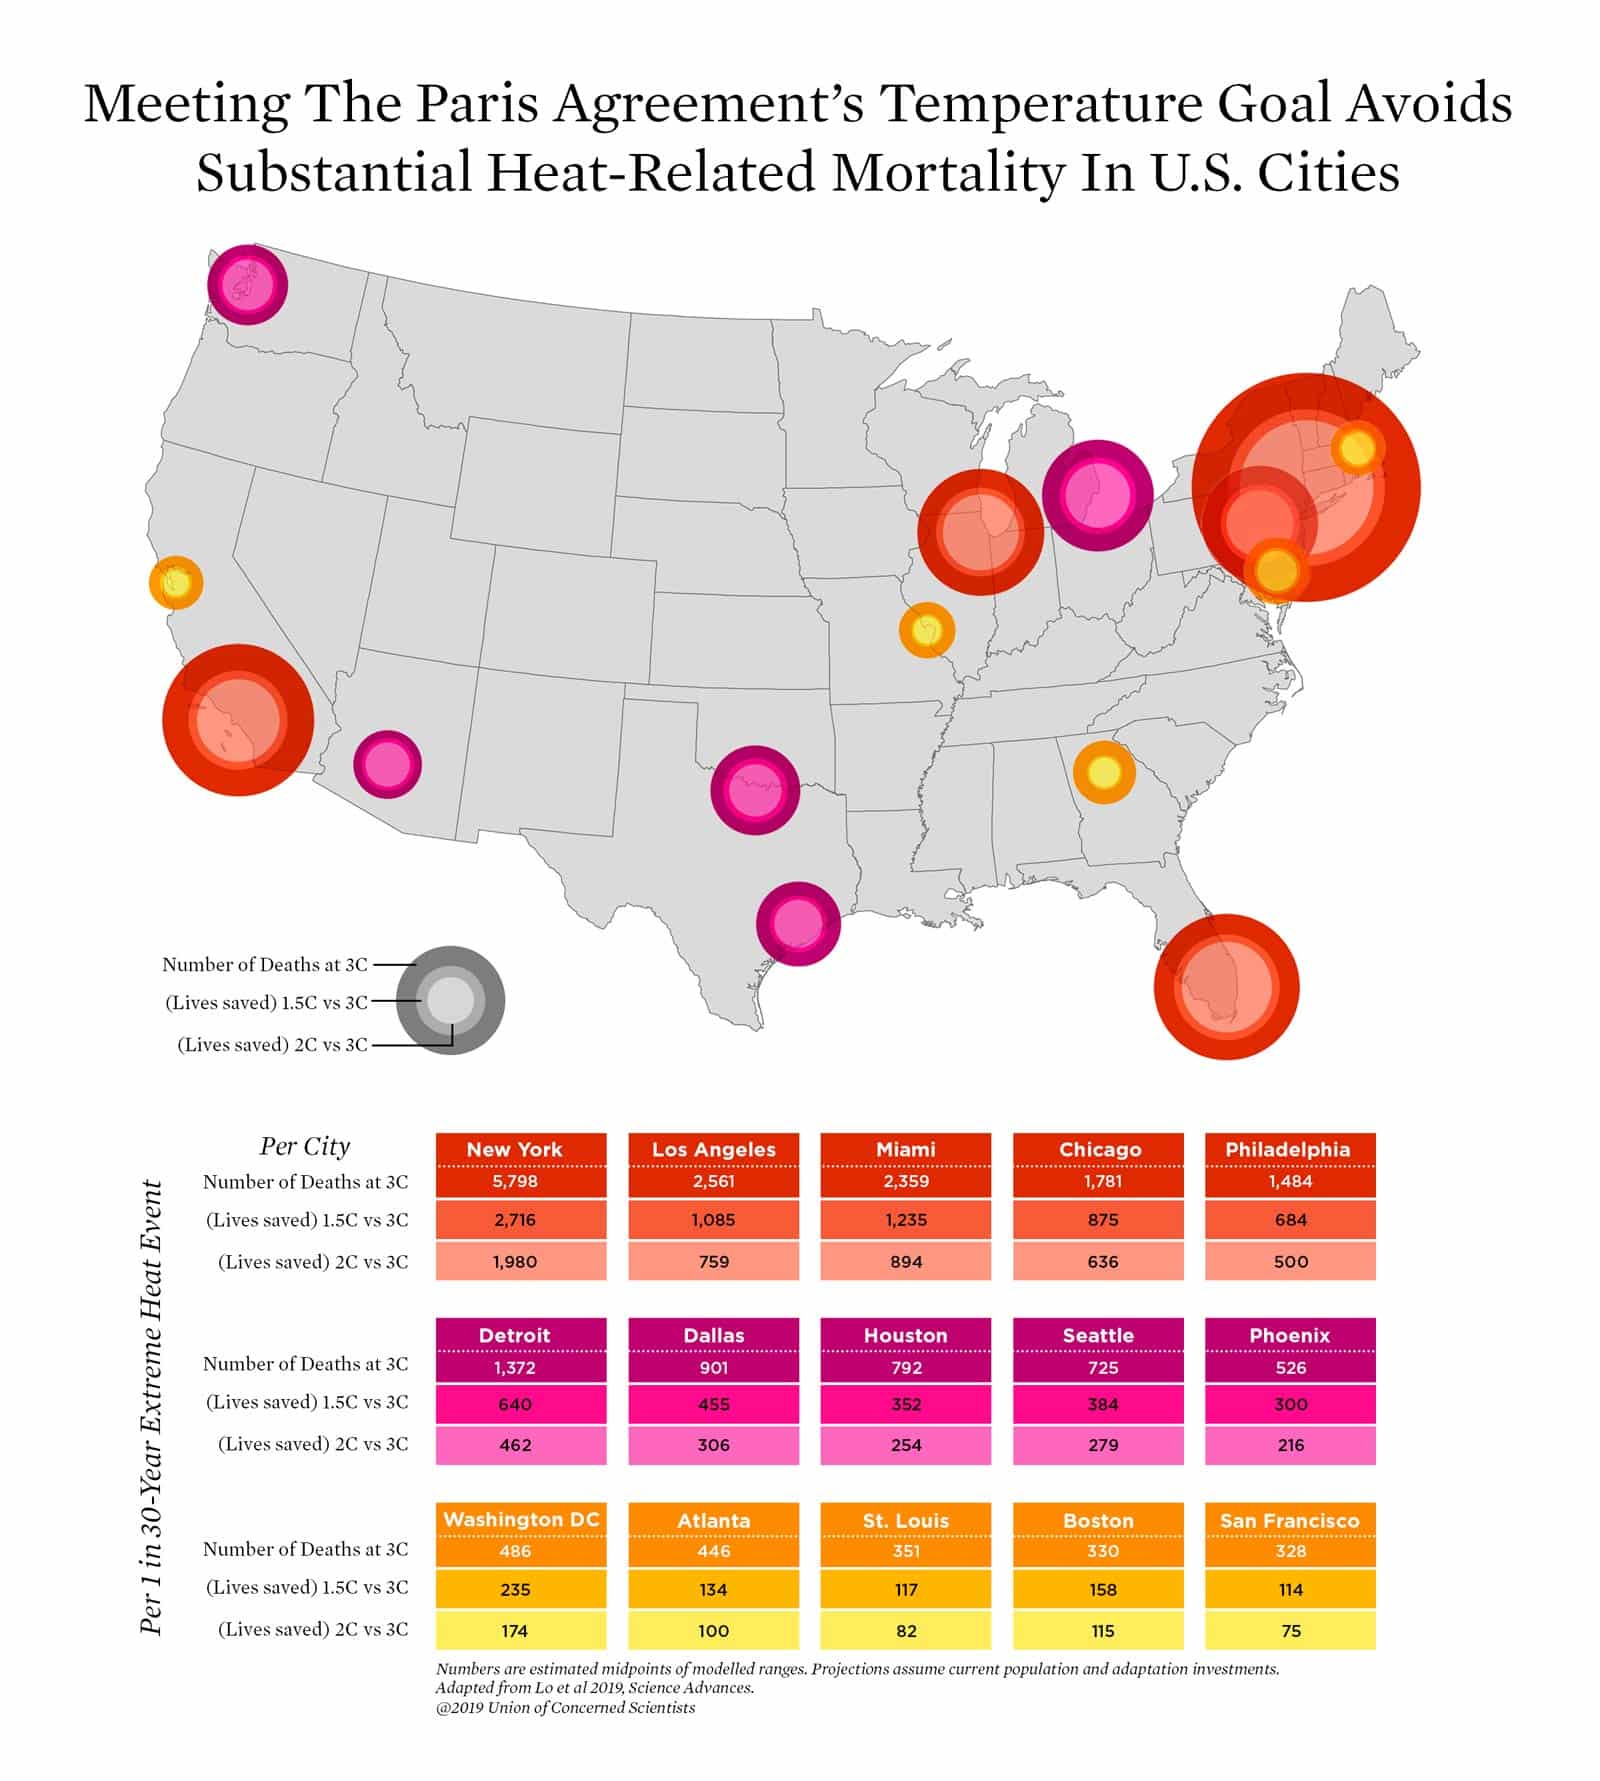 heat-related mortality map of US